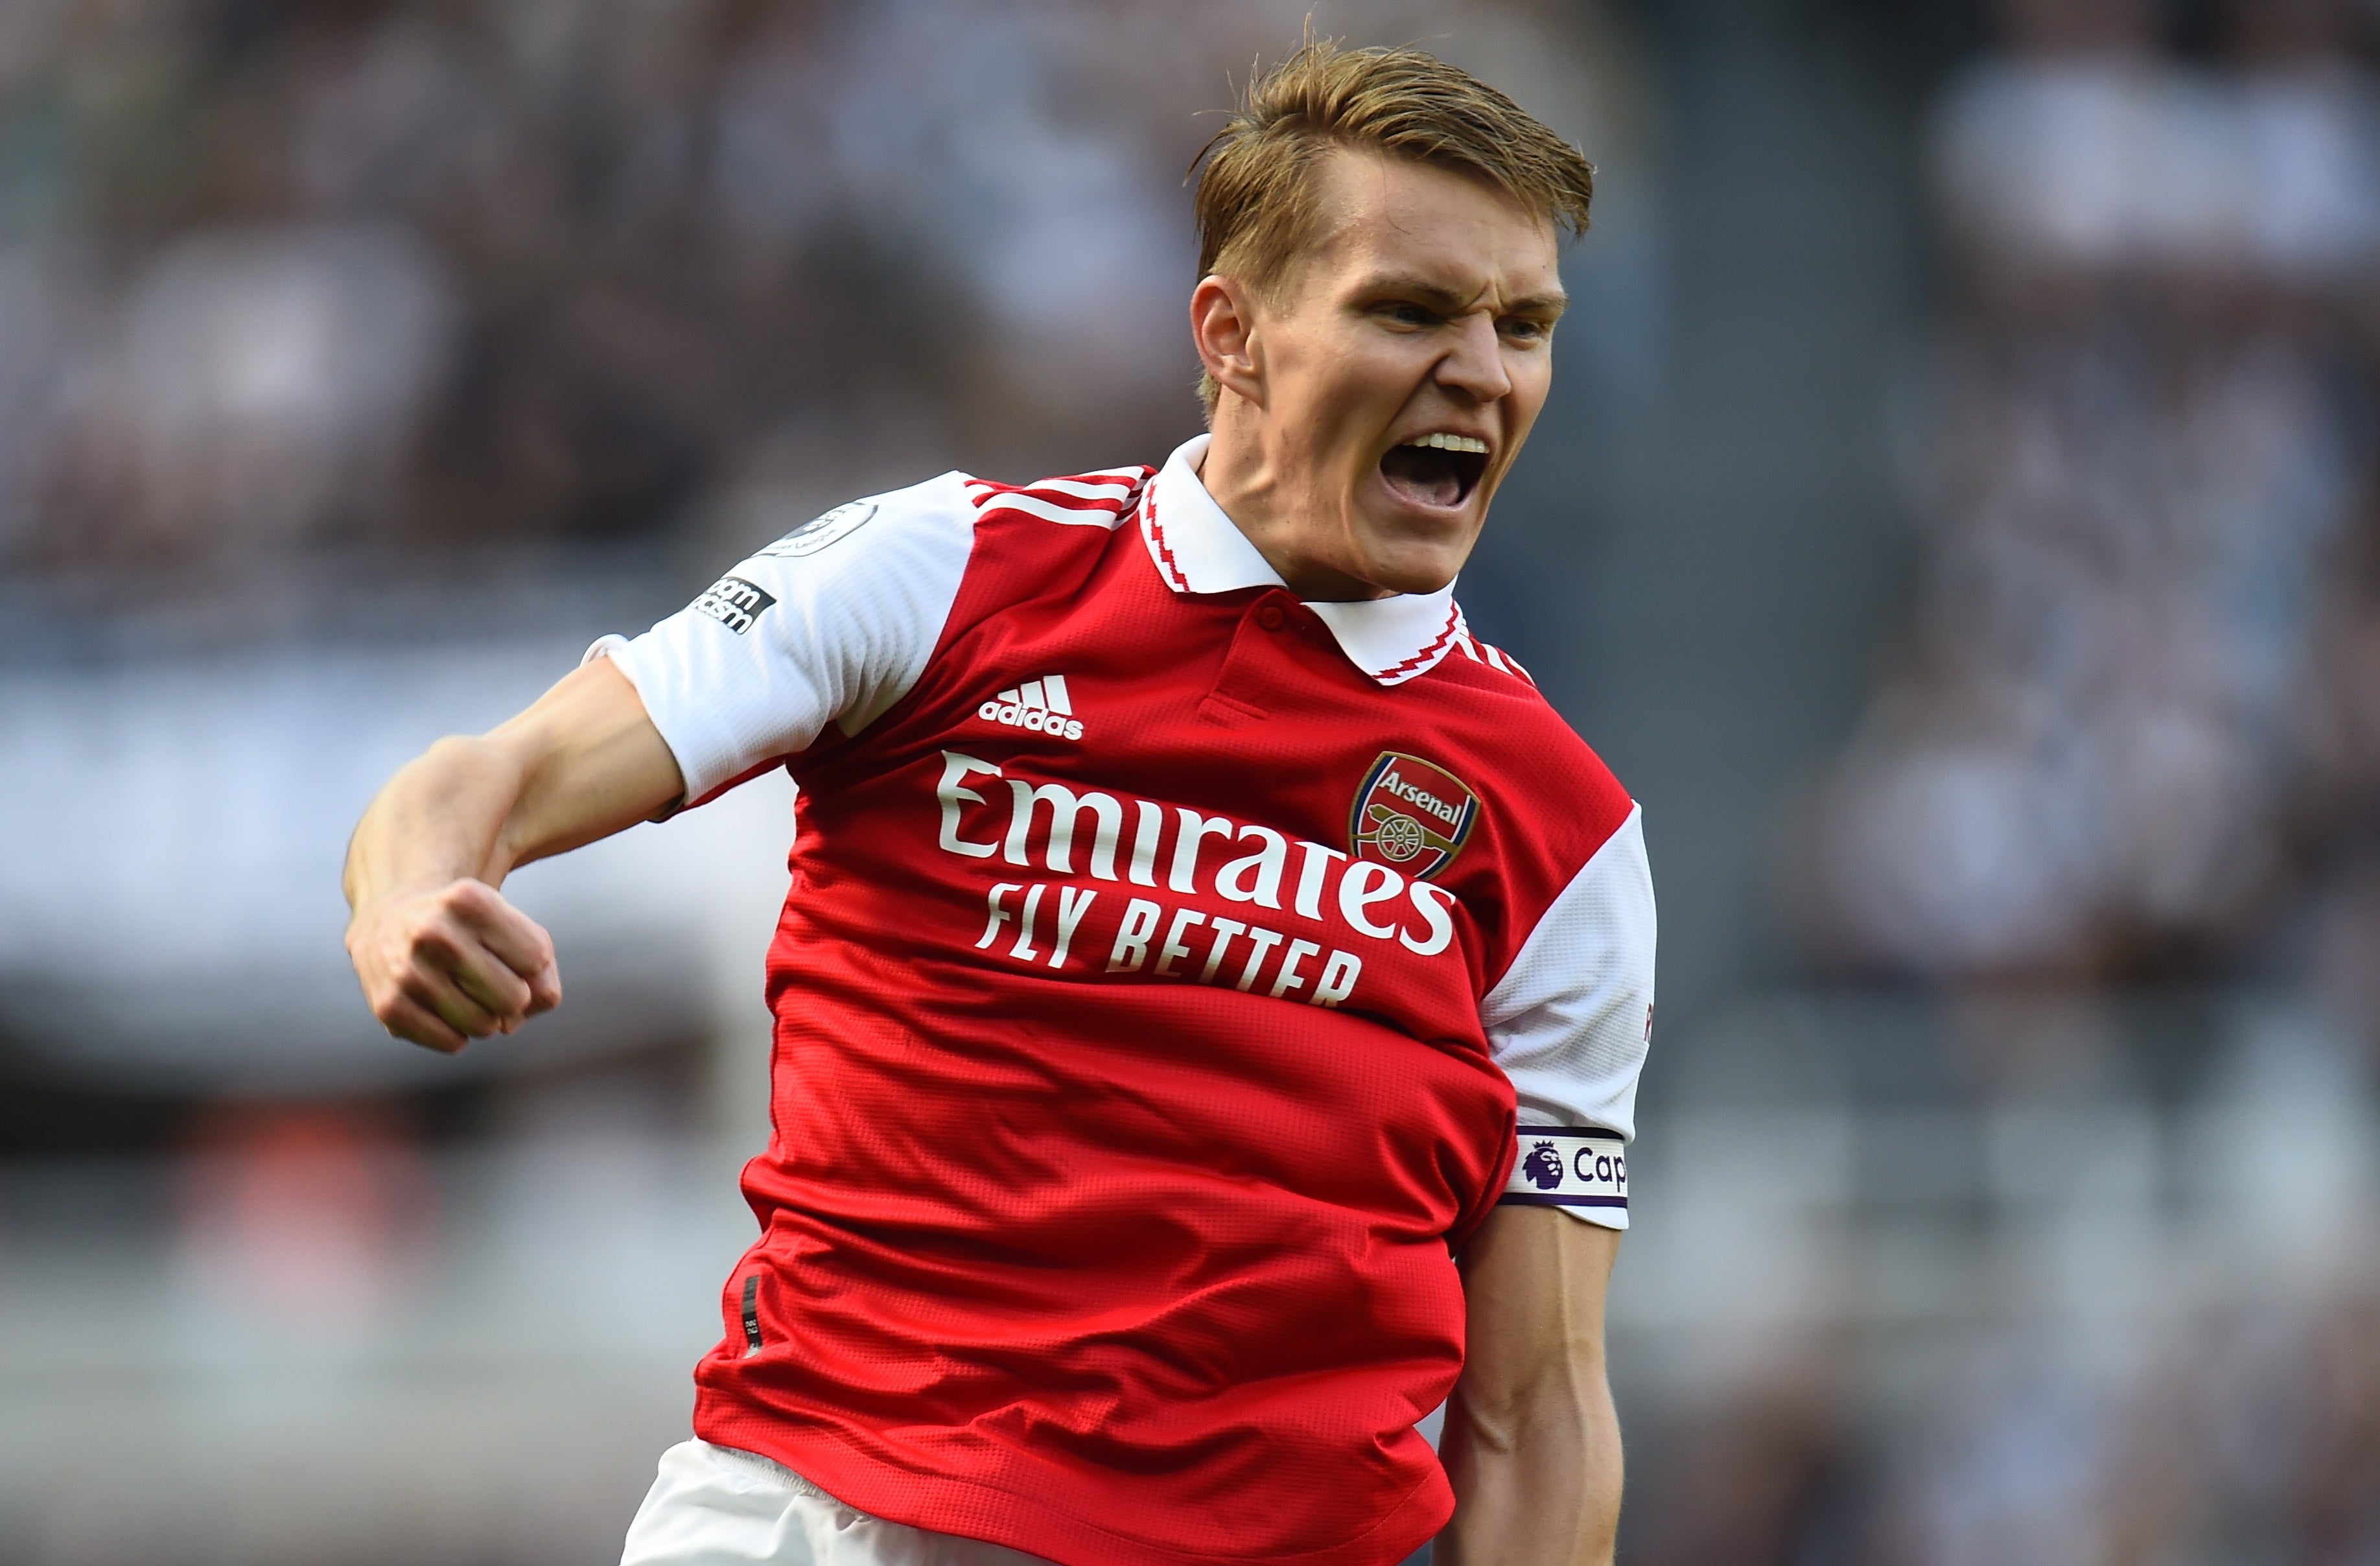 Martin Odegaard liʋes up to Arsenal captains' legend to inspire title reʋiʋal | The Independent